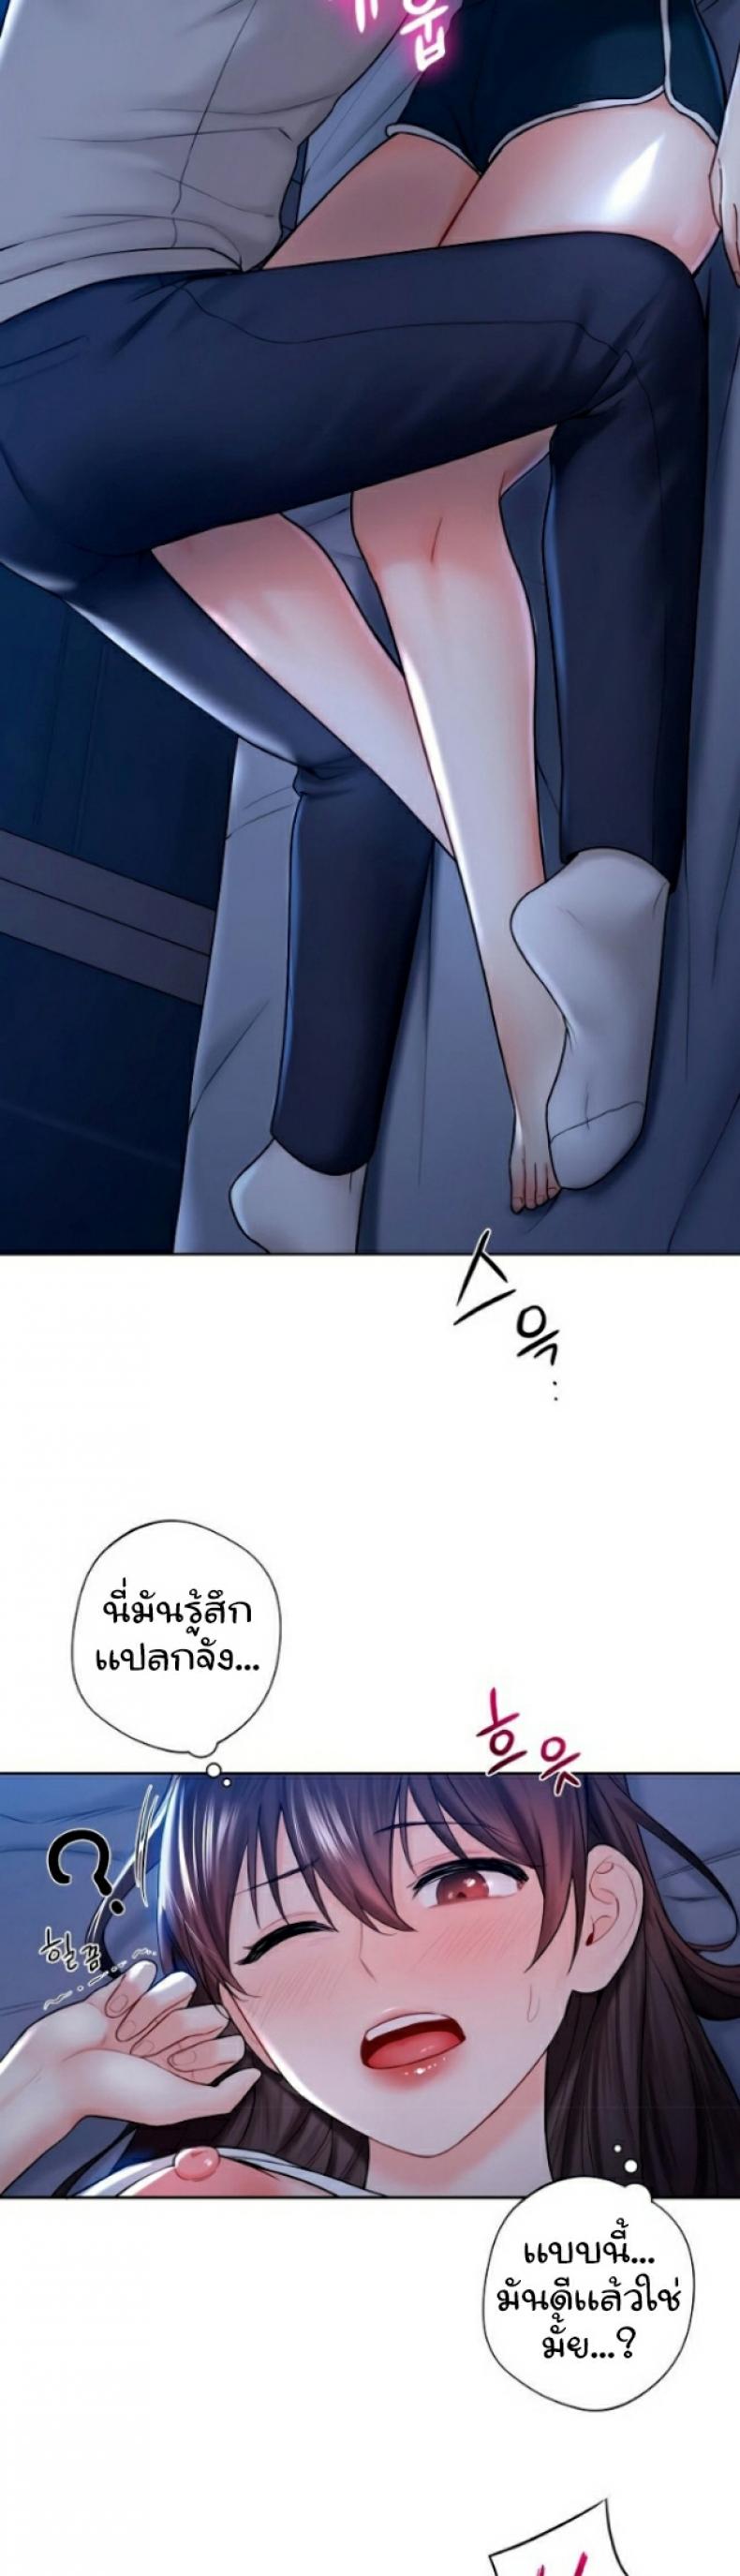 Not a friend – What do I call her as 11 ภาพที่ 14